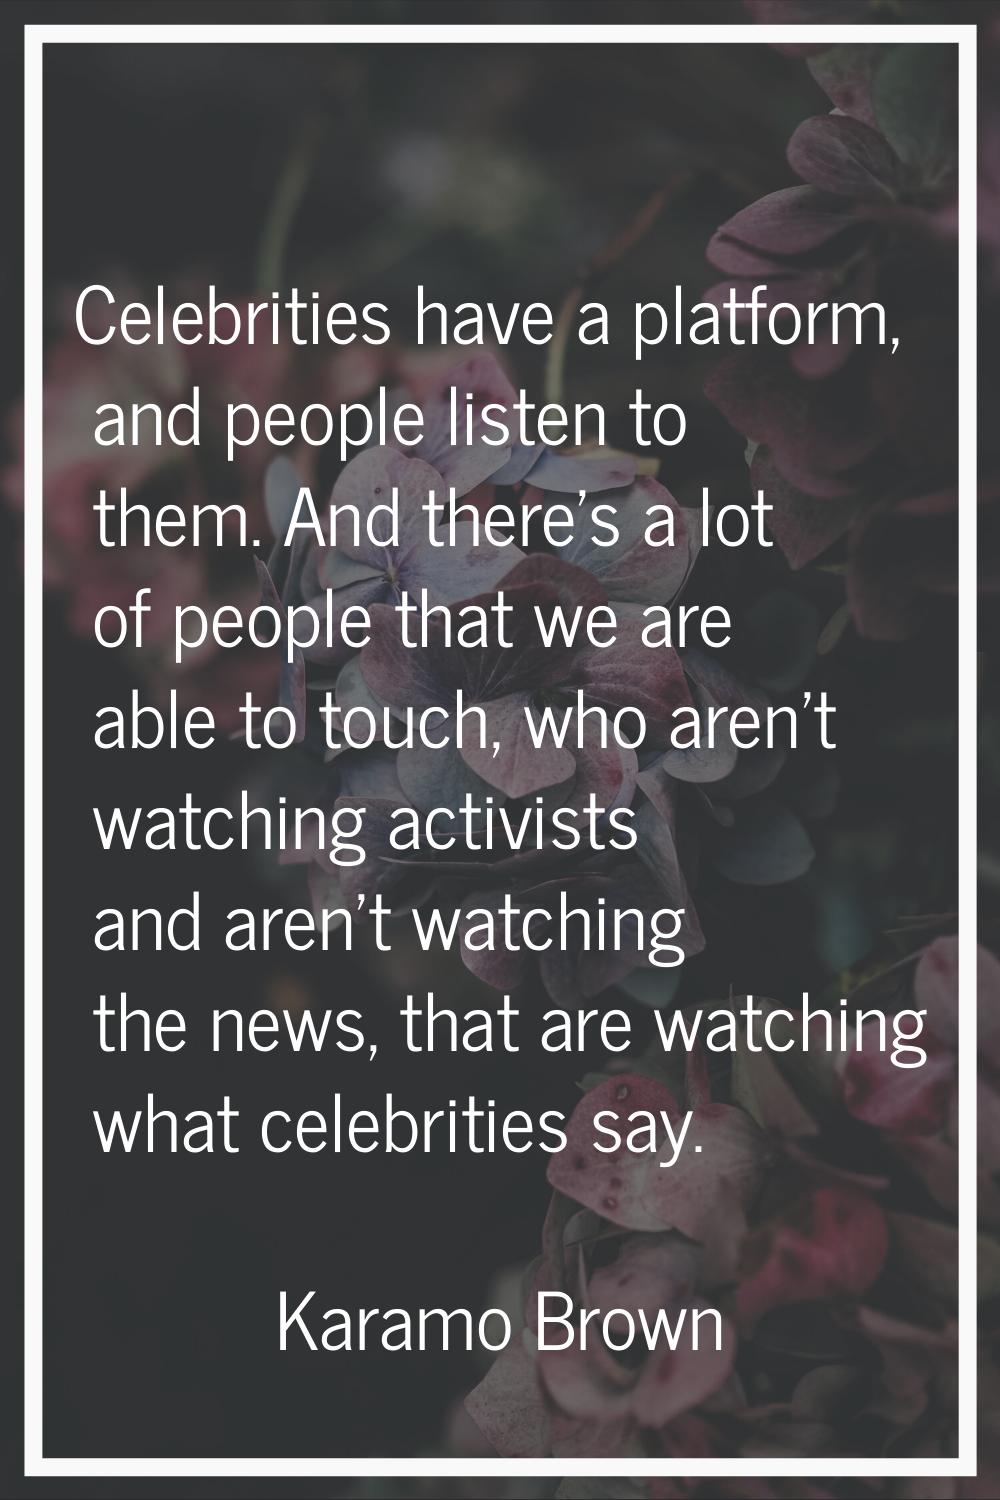 Celebrities have a platform, and people listen to them. And there's a lot of people that we are abl